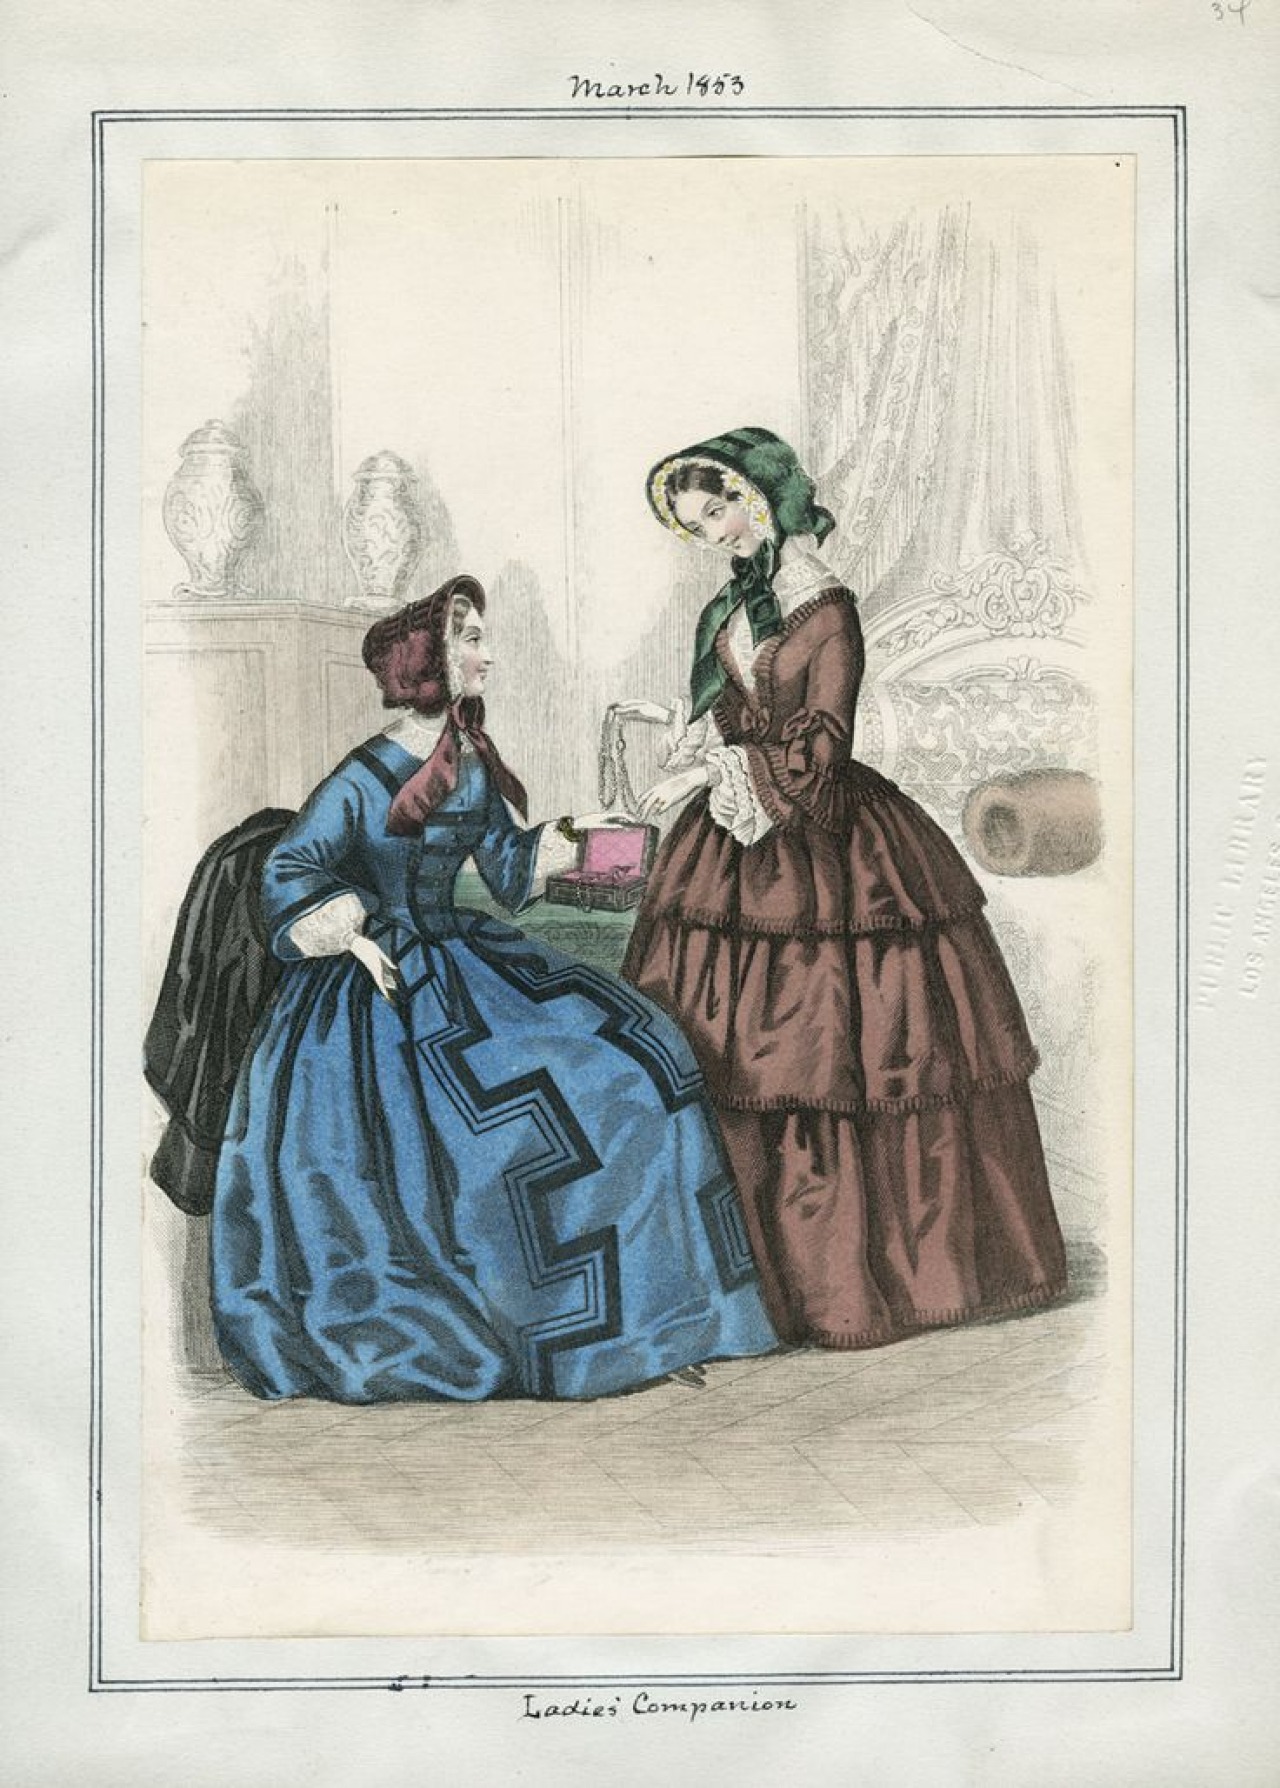 Daywear: 1850s-60s women  Fashion and Decor: A Cultural History